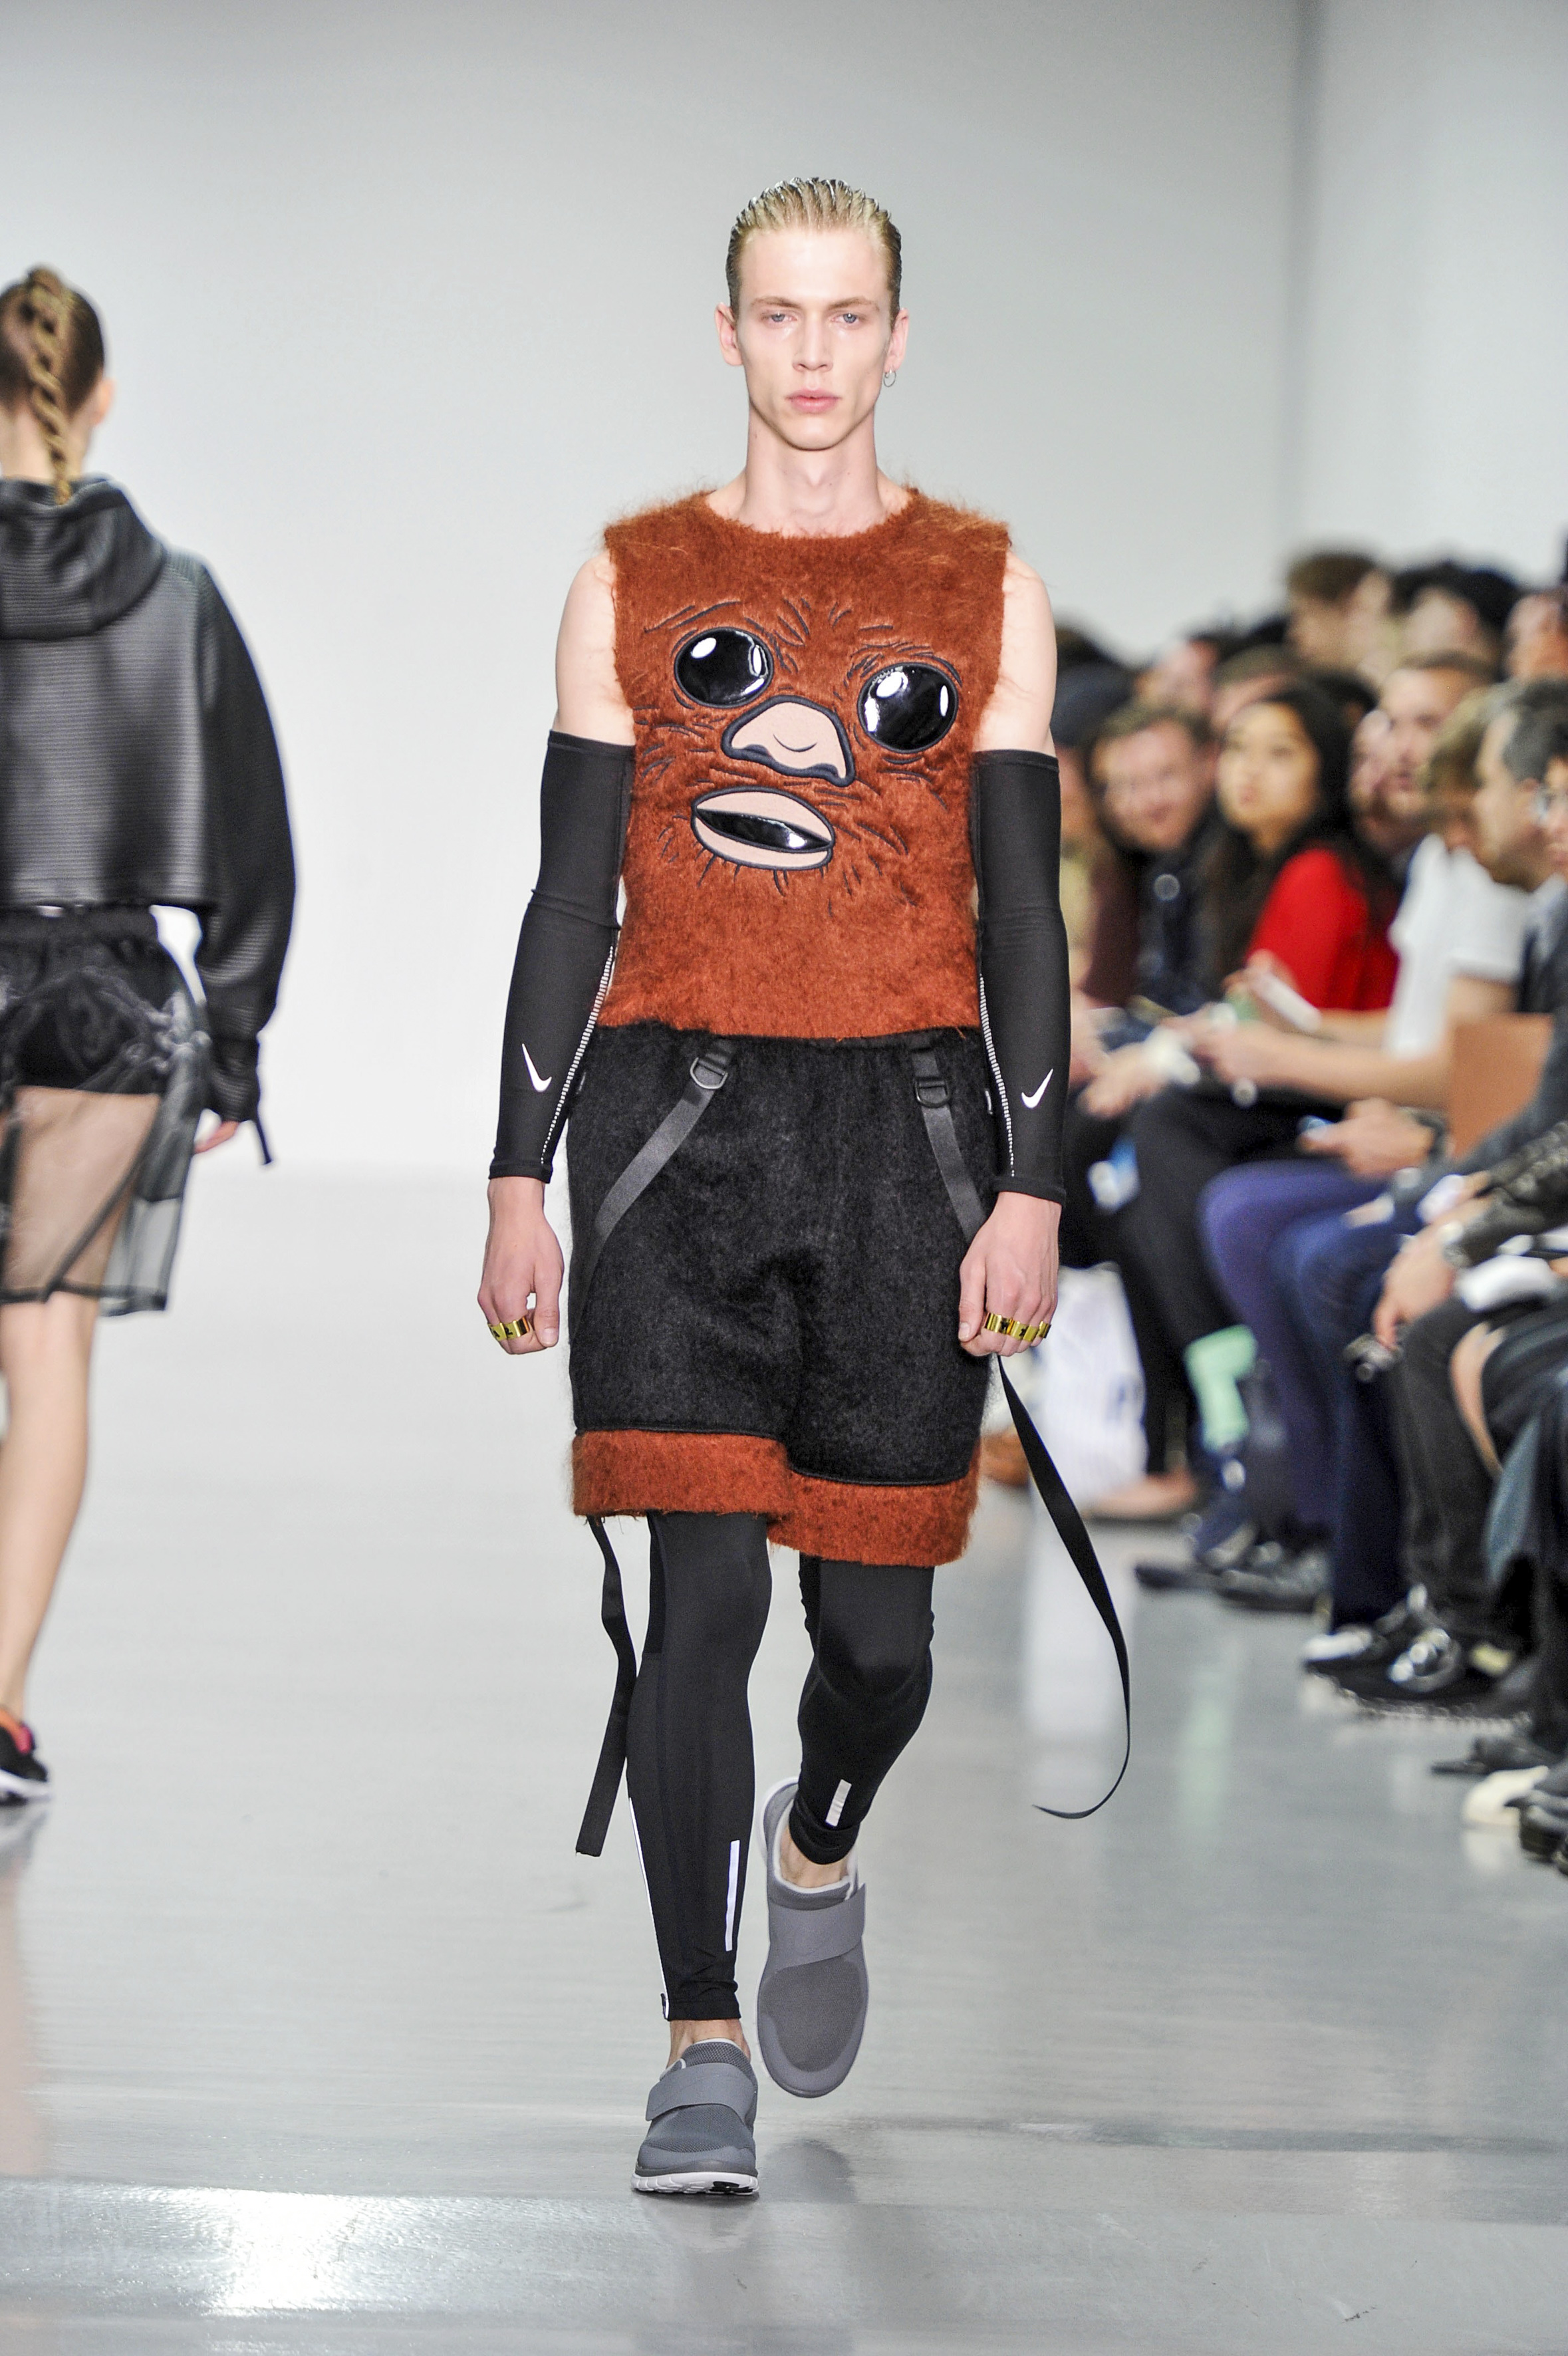 may-the-force-dress-you-star-wars-moda-bobby-abley-ss16-2